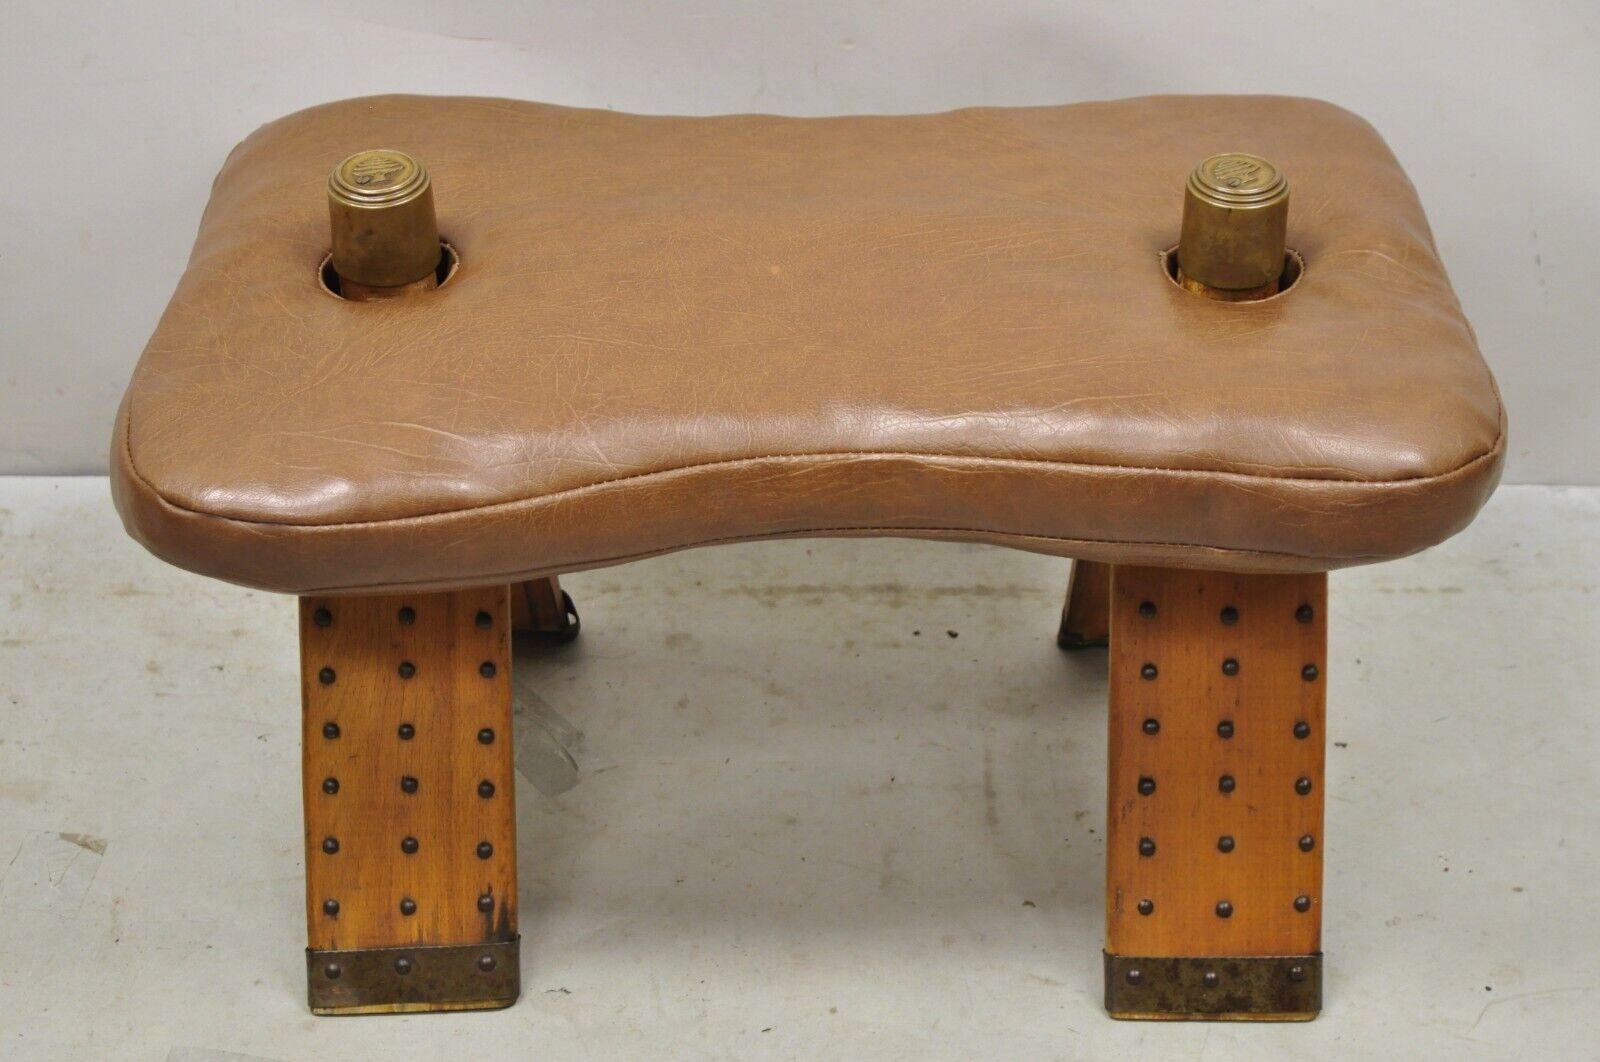 Vintage Moroccan Style Brown Vinyl Wooden Camel Saddle Ottoman Stool. Item features Brown vinyl saddle cushion, brass accents, wooden base, very nice vintage item, great style and form. Circa Mid 20th Century. Measurements: 16